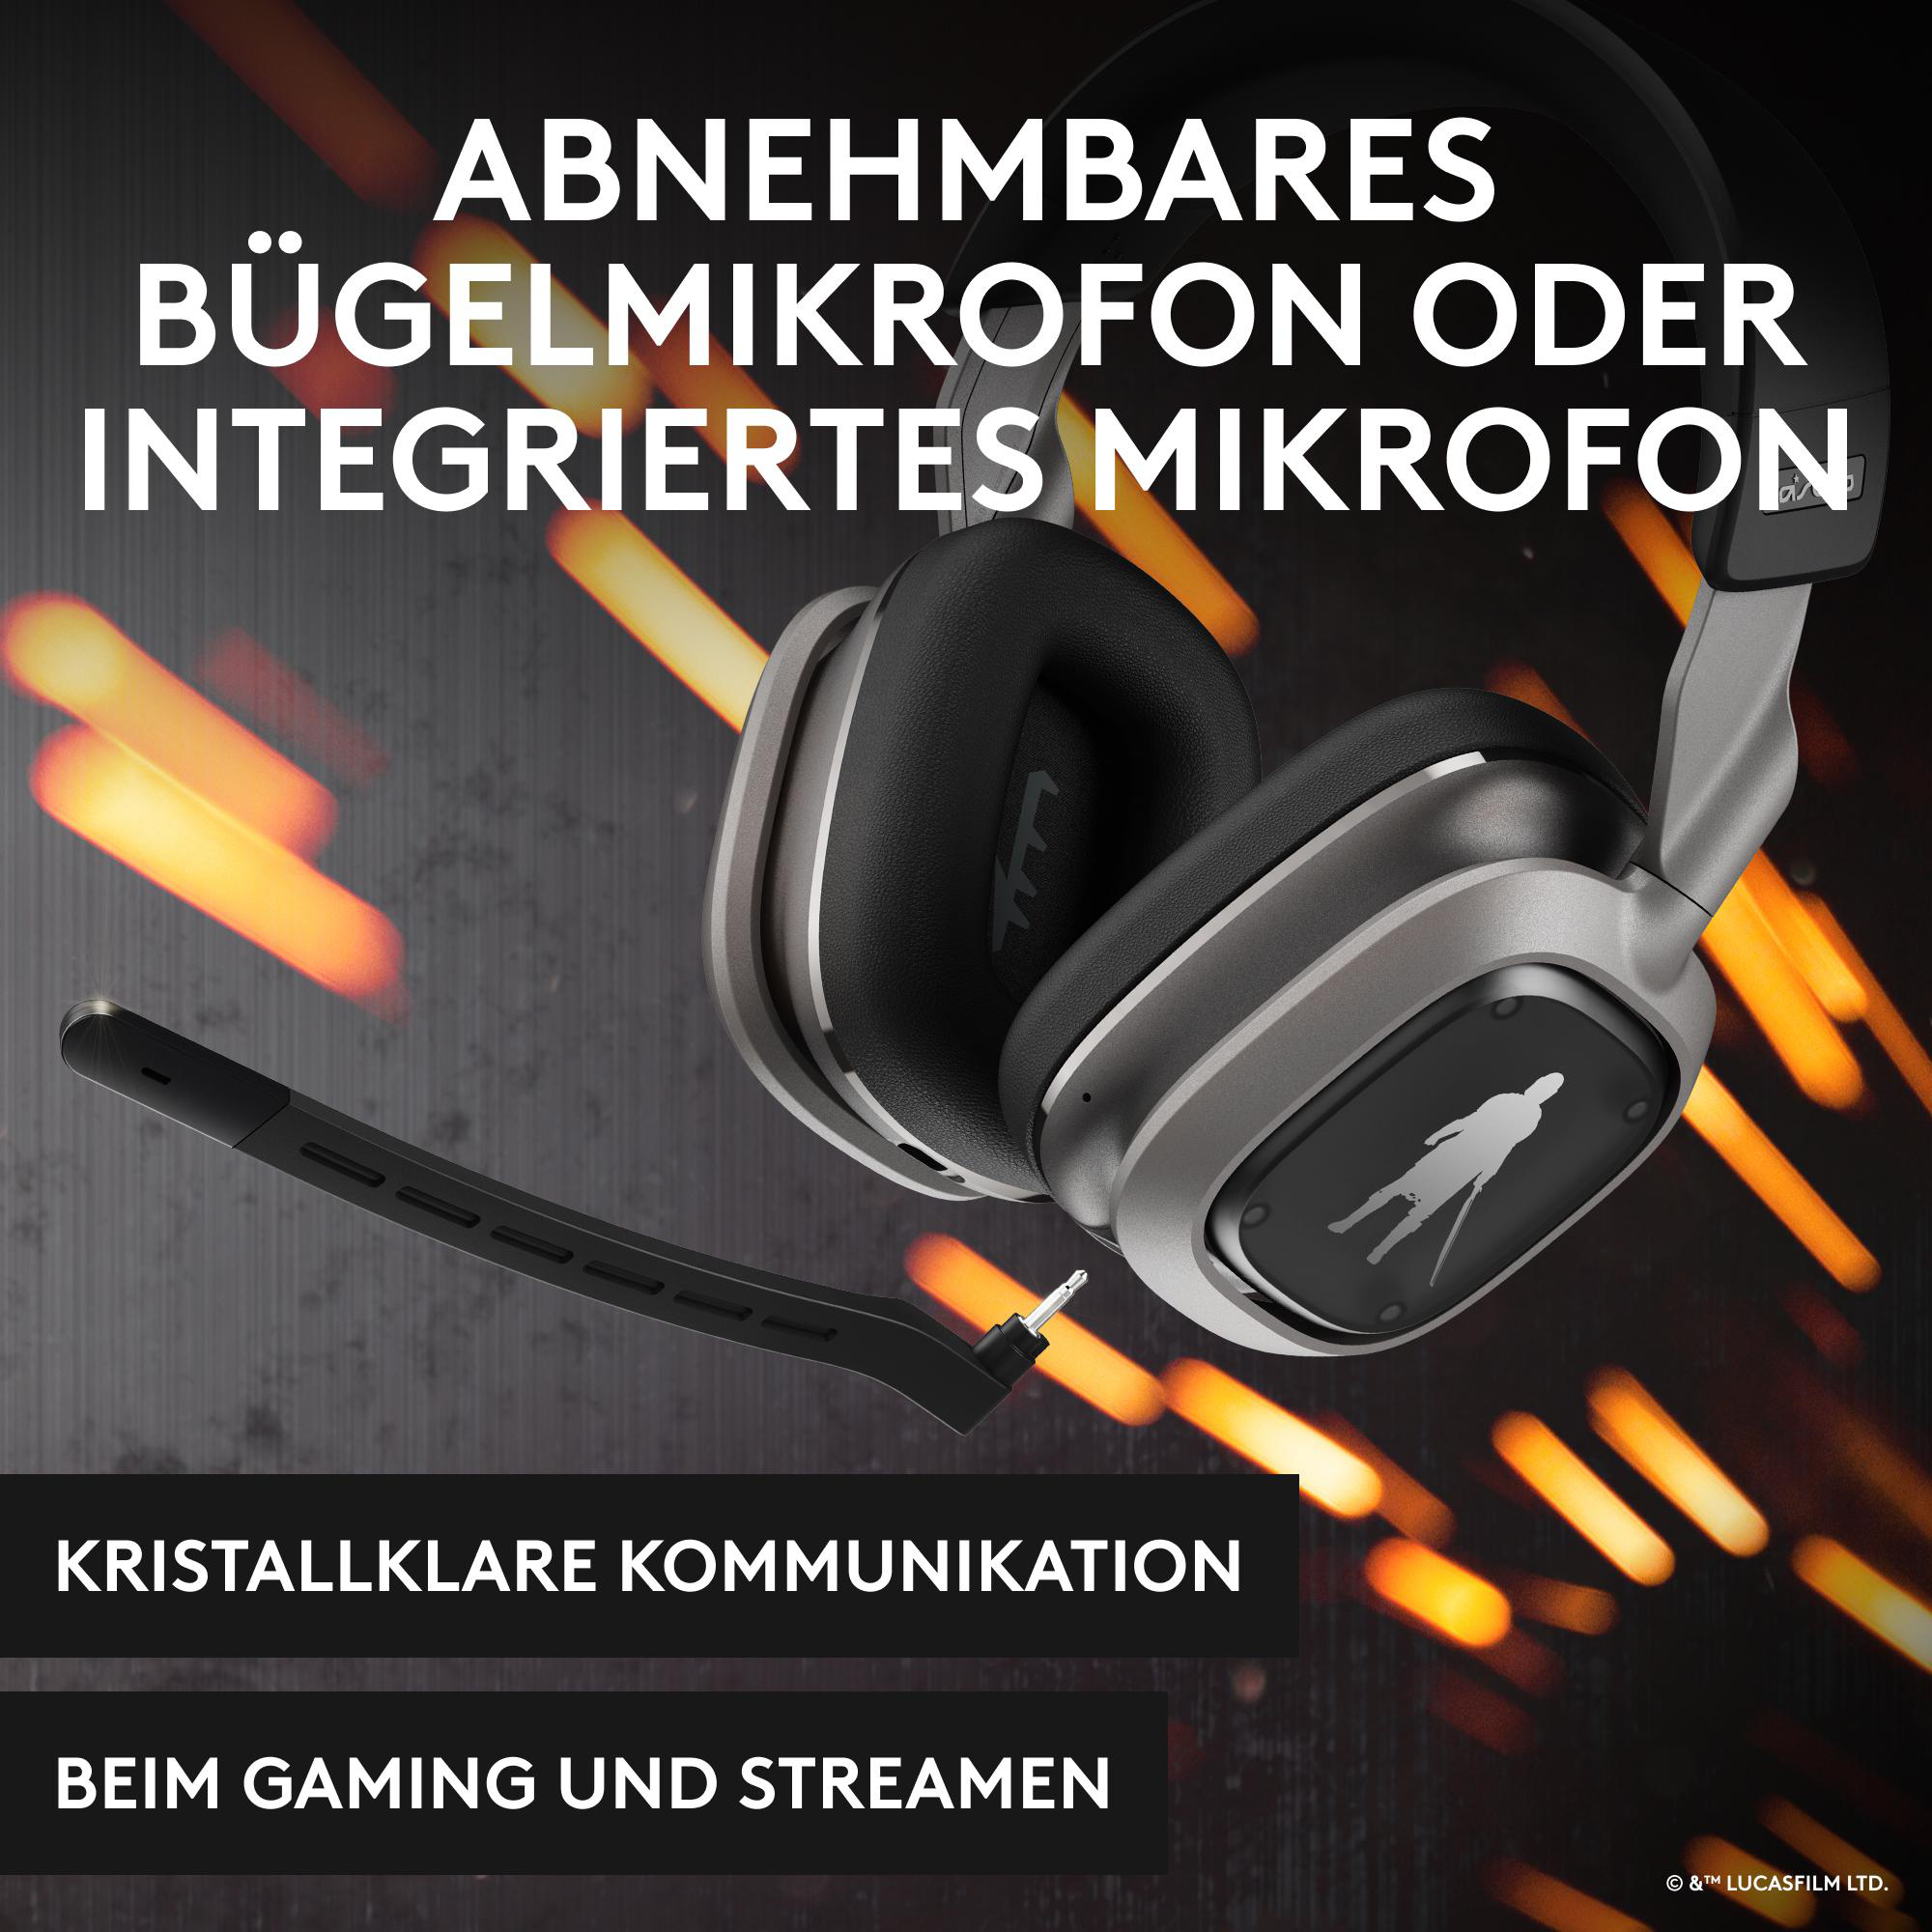 ASTRO GAMING A30 Mandalorian Headset Lightspeed Schwarz Over-ear Edition für Bluetooth The PS5, Gaming Kabelloses